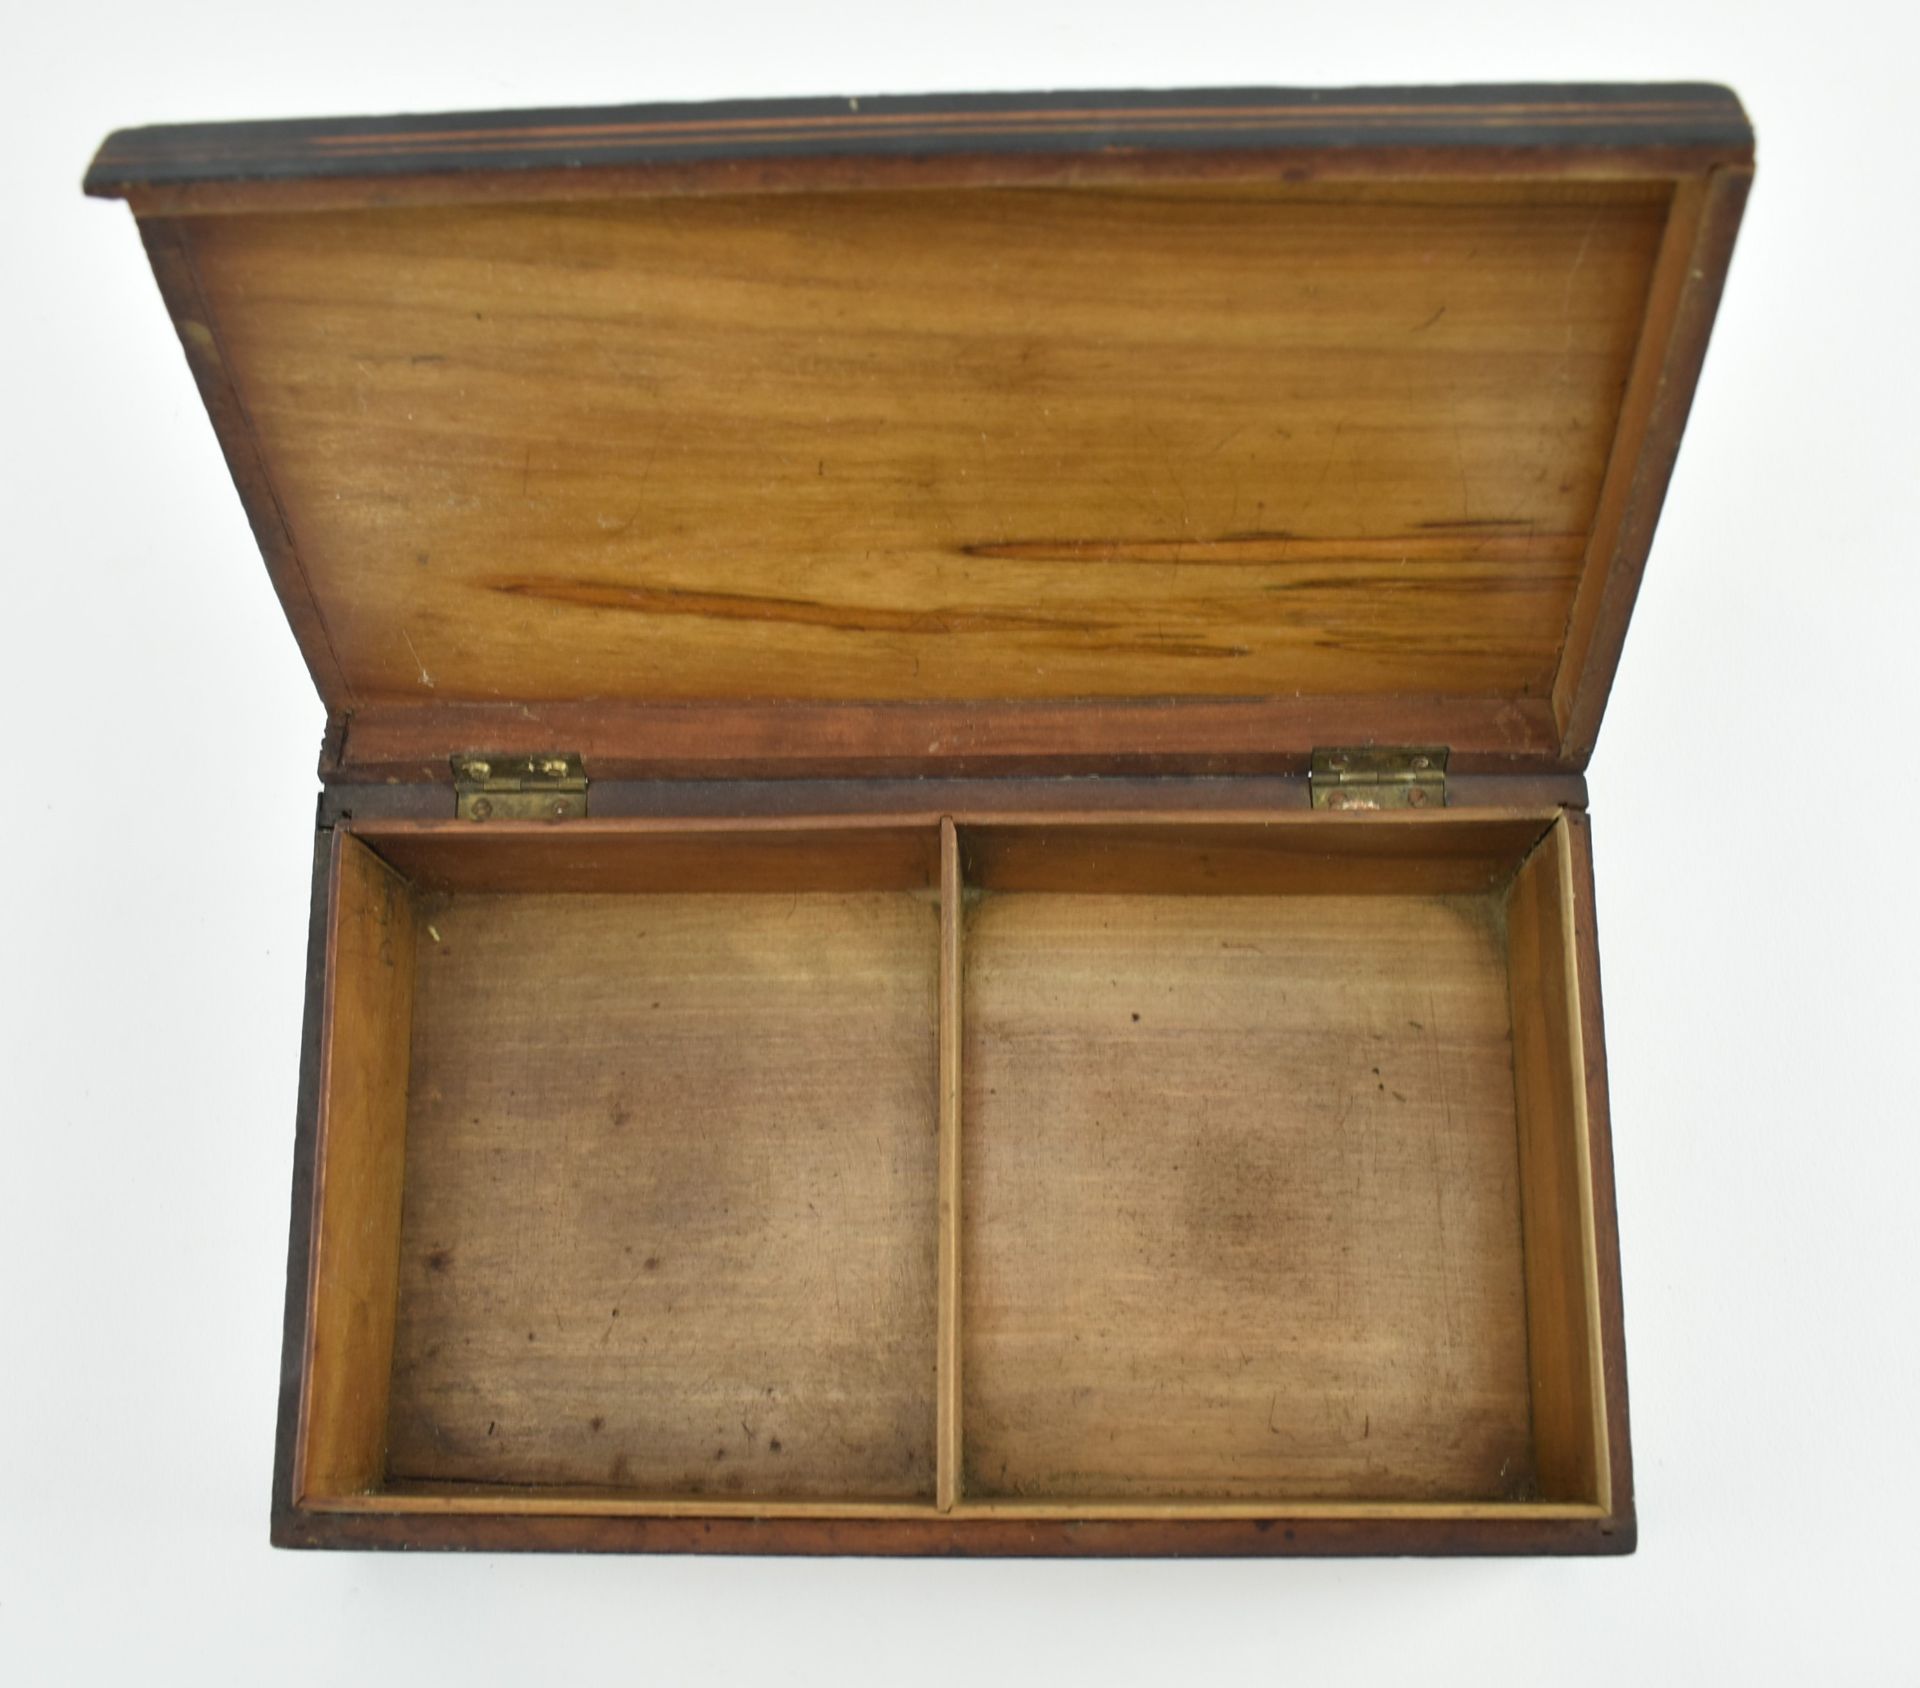 20TH CENTURY EUROPEAN MARQUETRY INLAID WOODEN JEWELRY BOX - Image 4 of 7